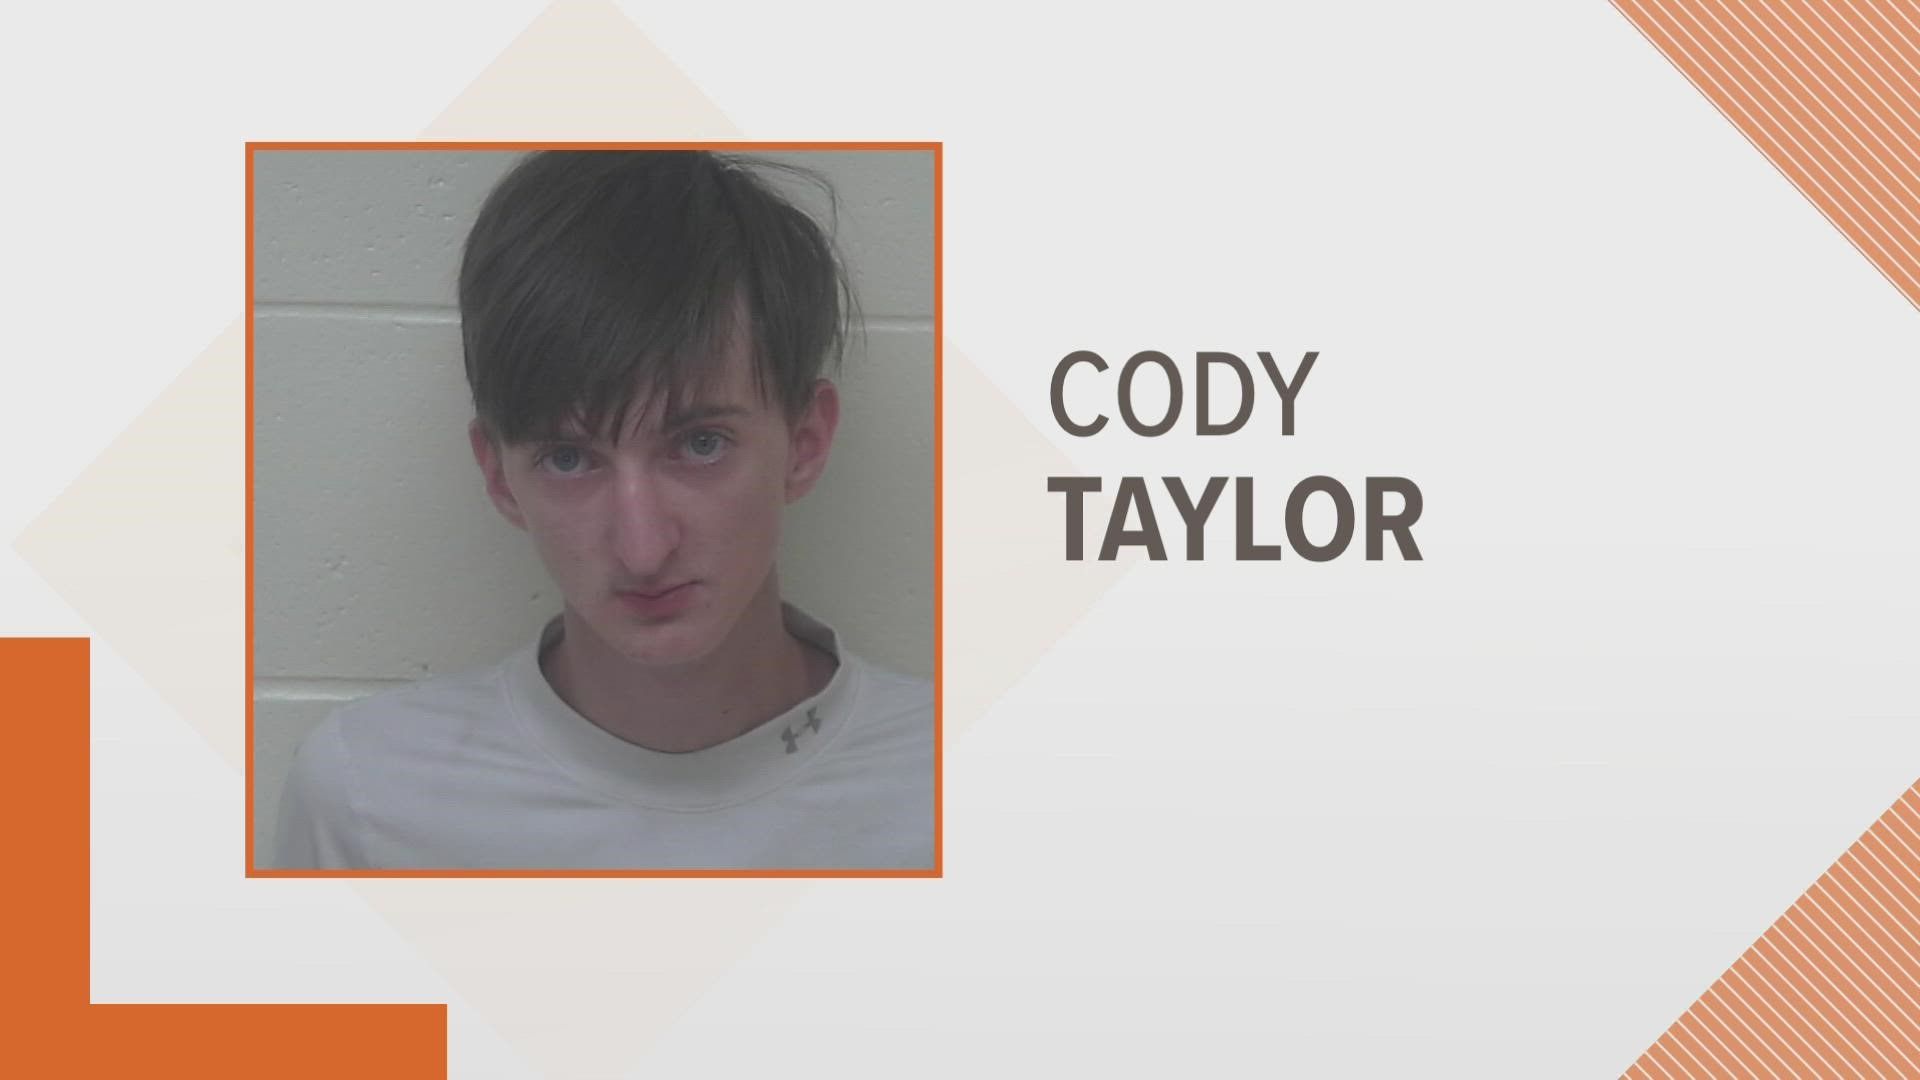 Cody Lee Taylor, 18, is facing one charge of rape.